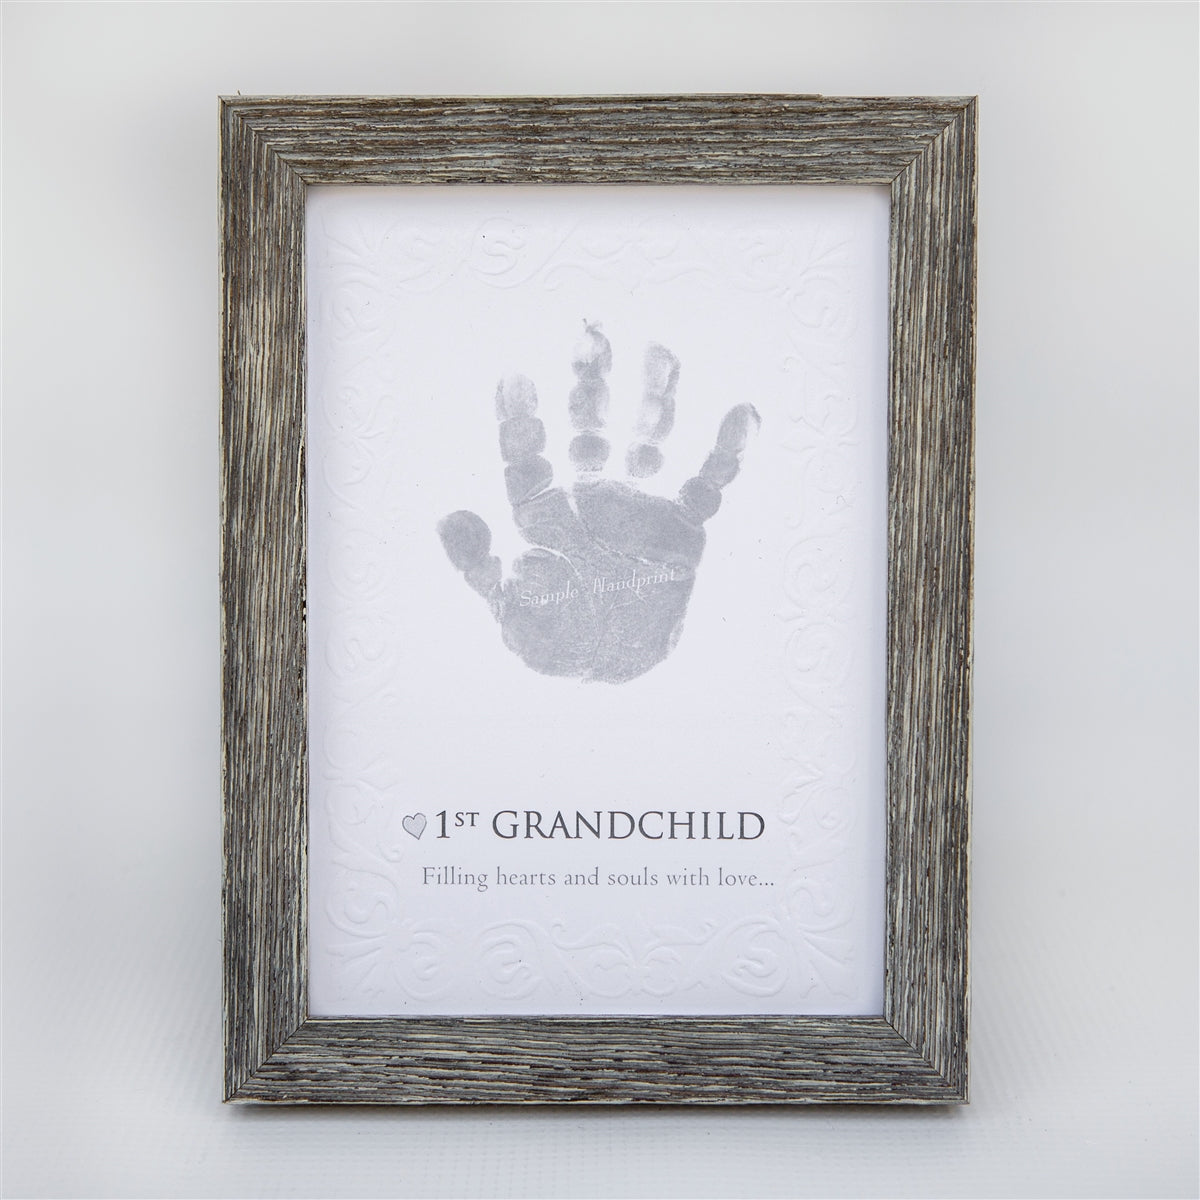 5x7 farmhouse frame with &quot;1st Grandchild&quot; sentiment on embossed cardstock with space for a child&#39;s handprint.